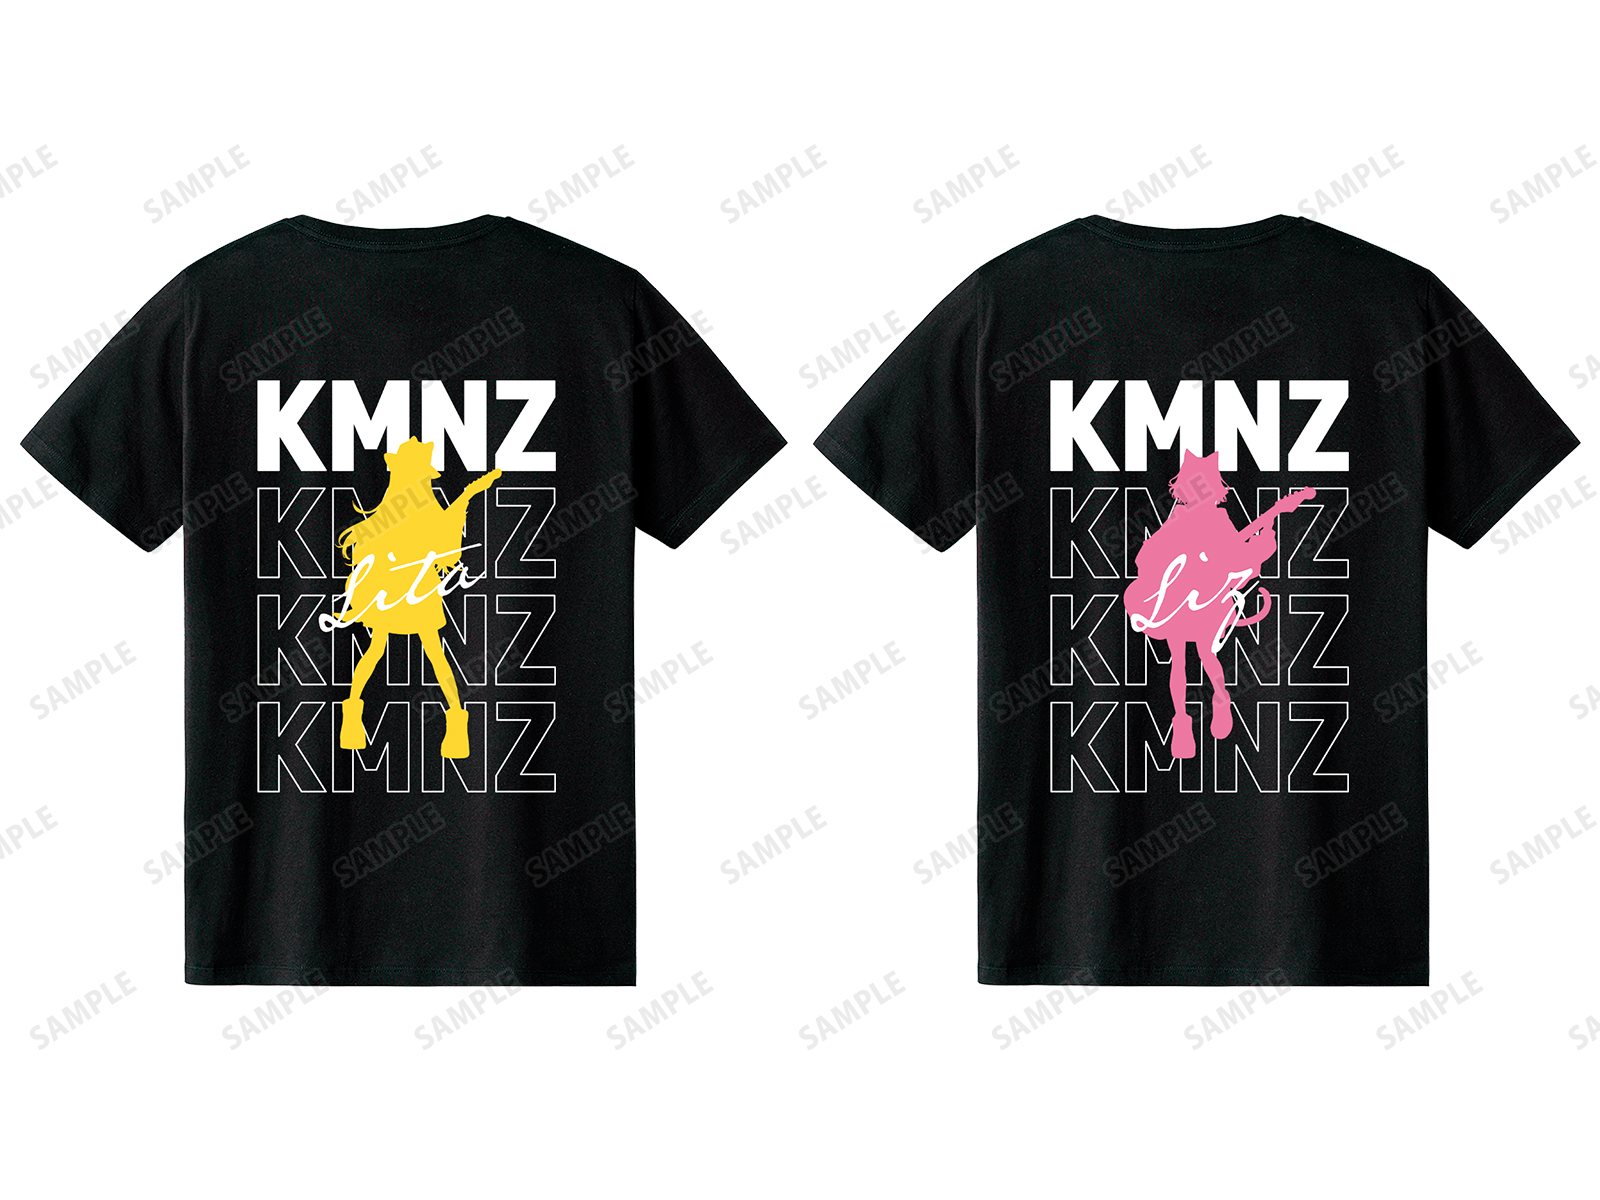 kmnz-pop-up-shop-in-tower-records10-2